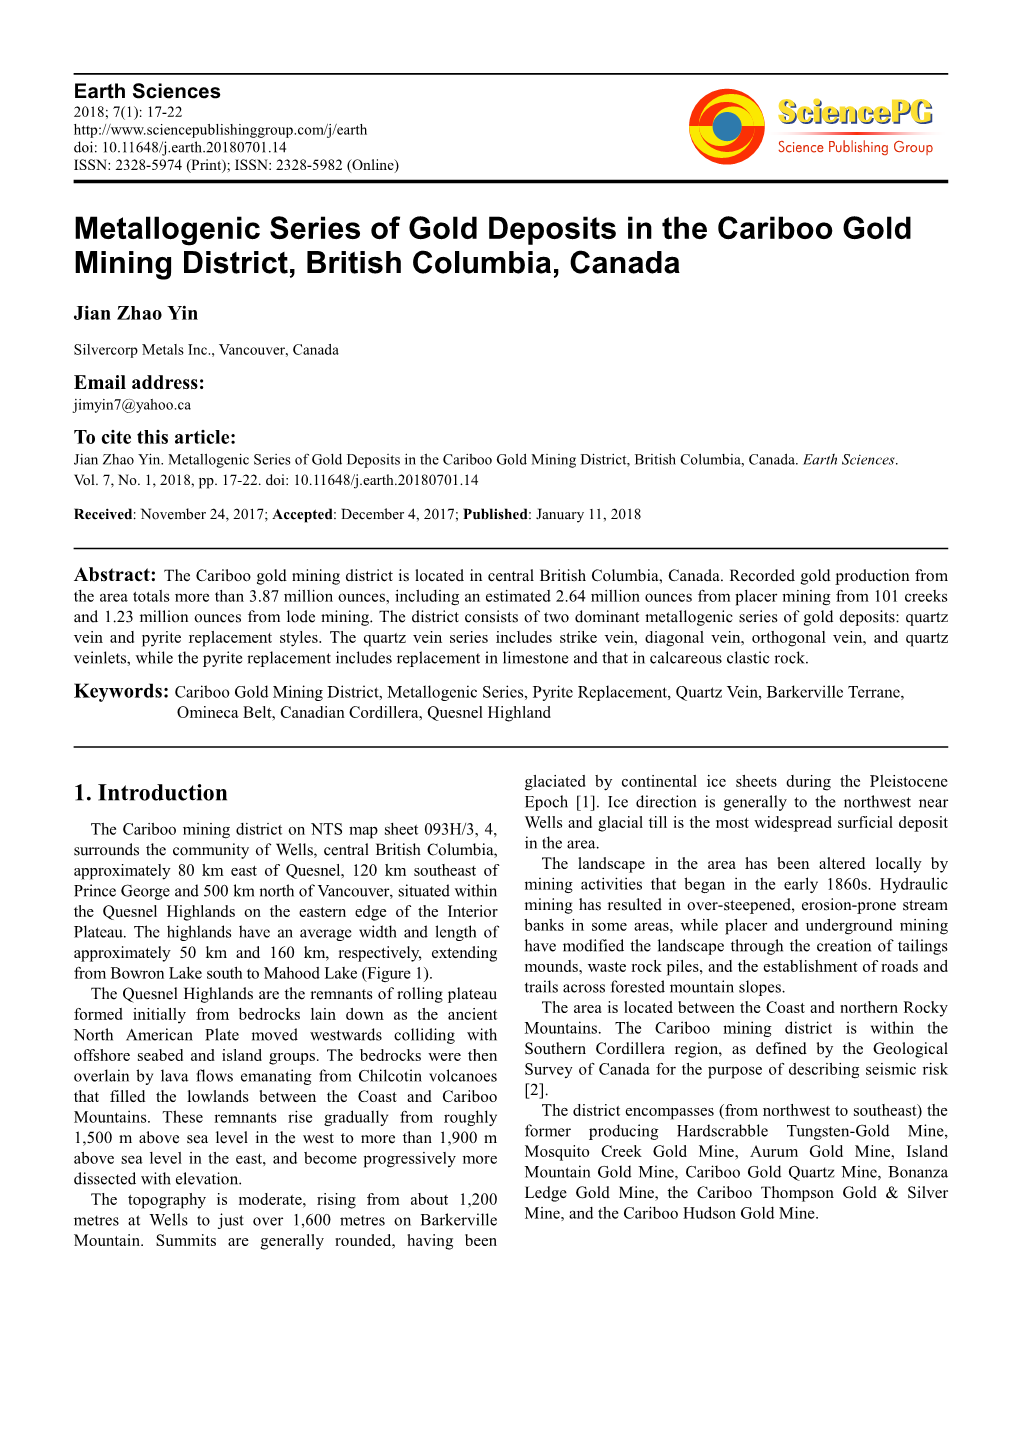 Metallogenic Series of Gold Deposits in the Cariboo Gold Mining District, British Columbia, Canada